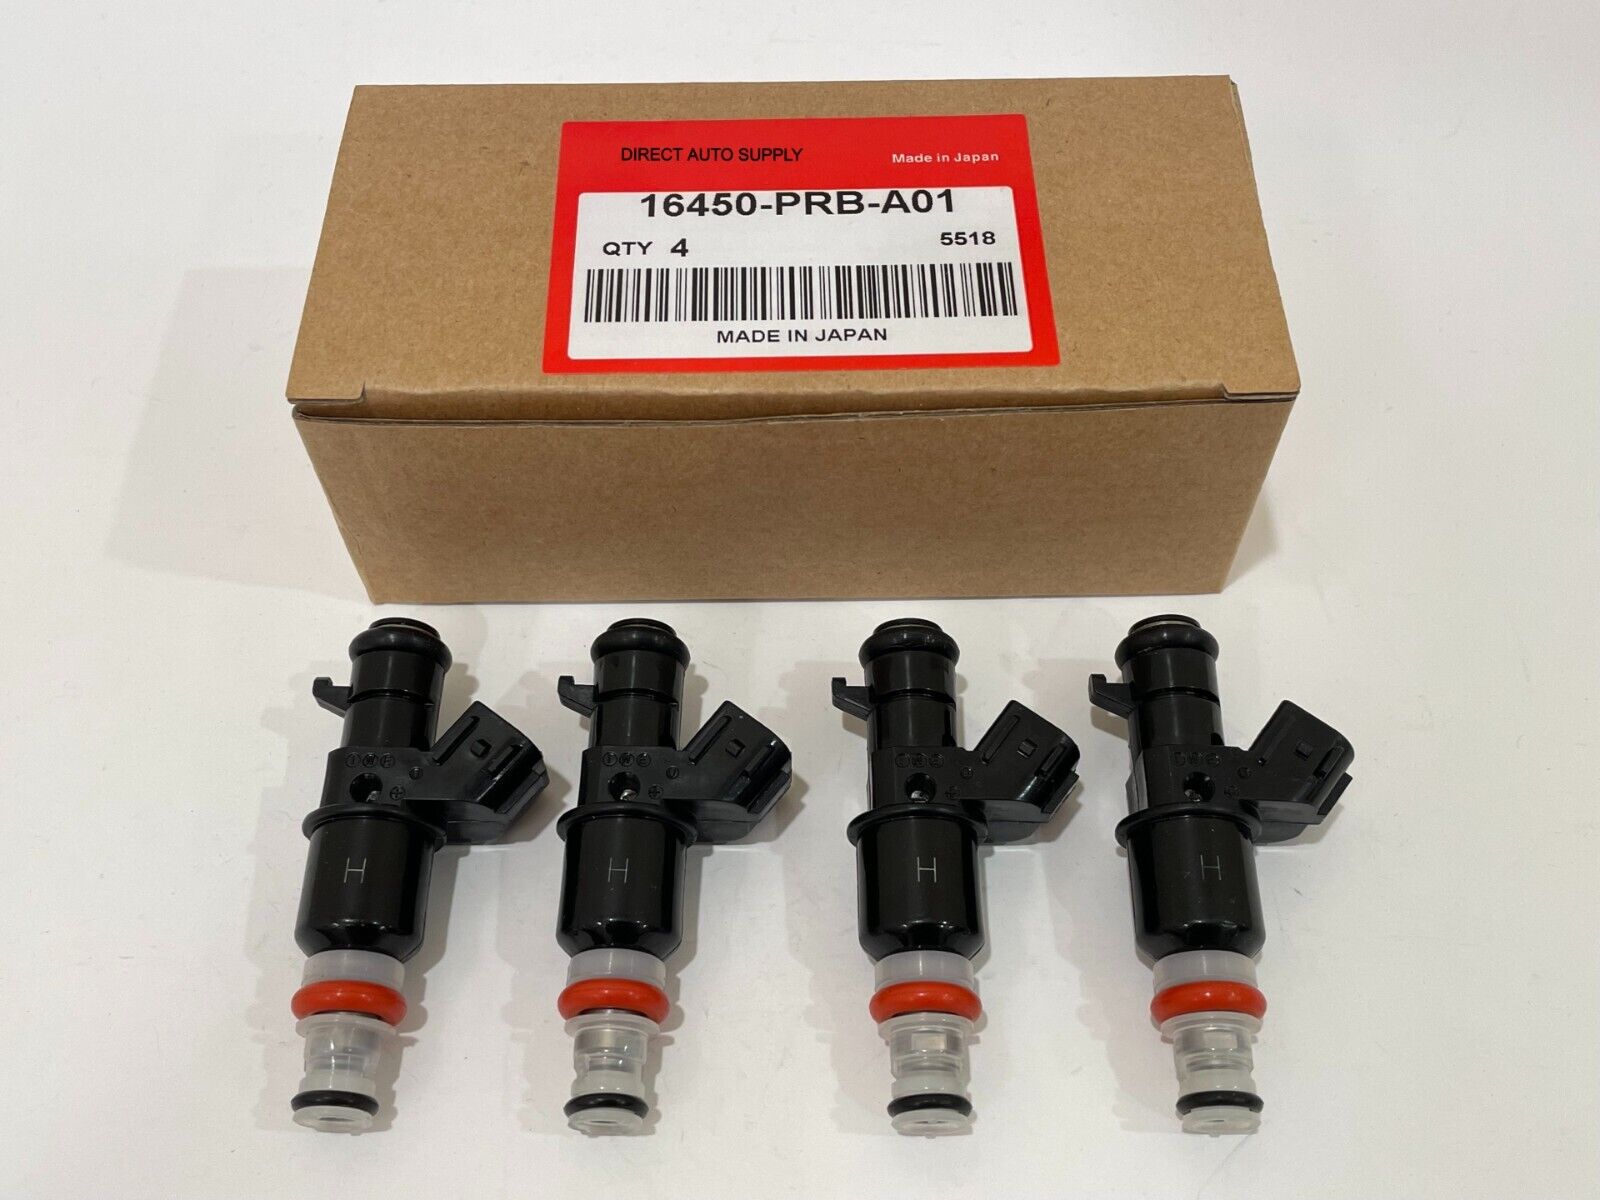 4 NEW OEM FUEL INJECTORS 16450-PRB-A01 FOR 02-04 RSX TYPE-S 2.0L